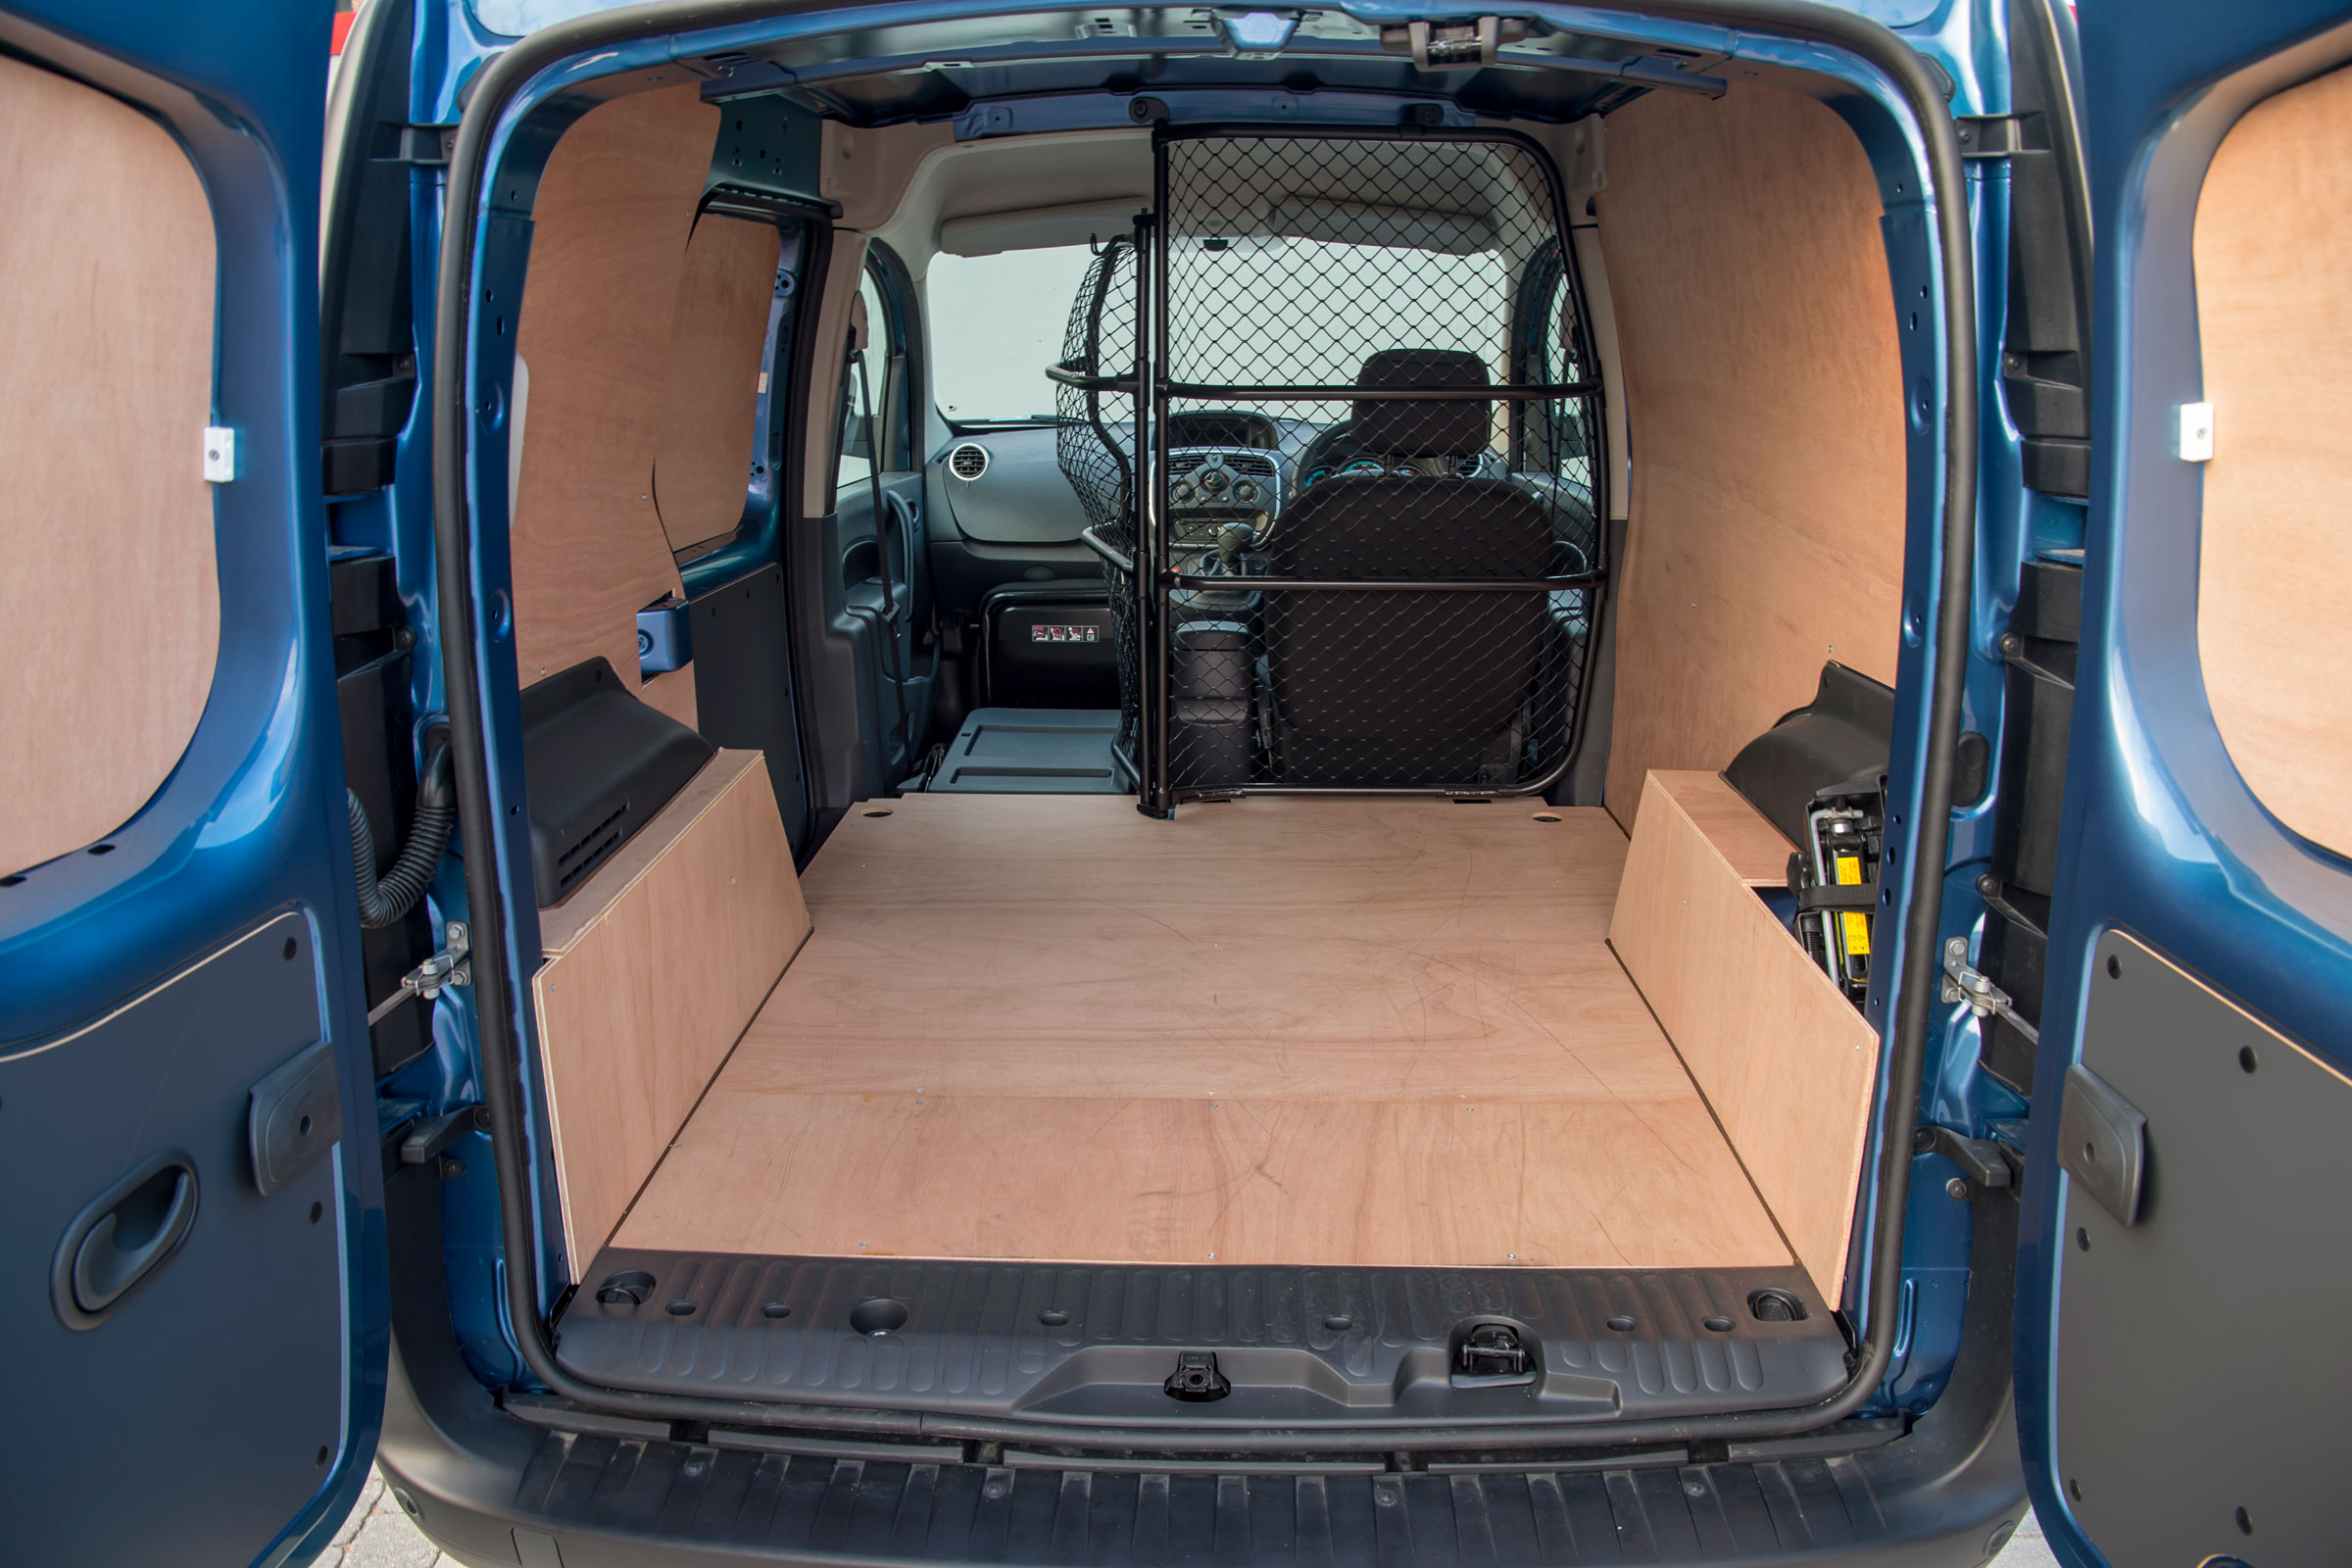 Renault Kangoo E-TECH electric (2011-2021) seating & load space |  DrivingElectric